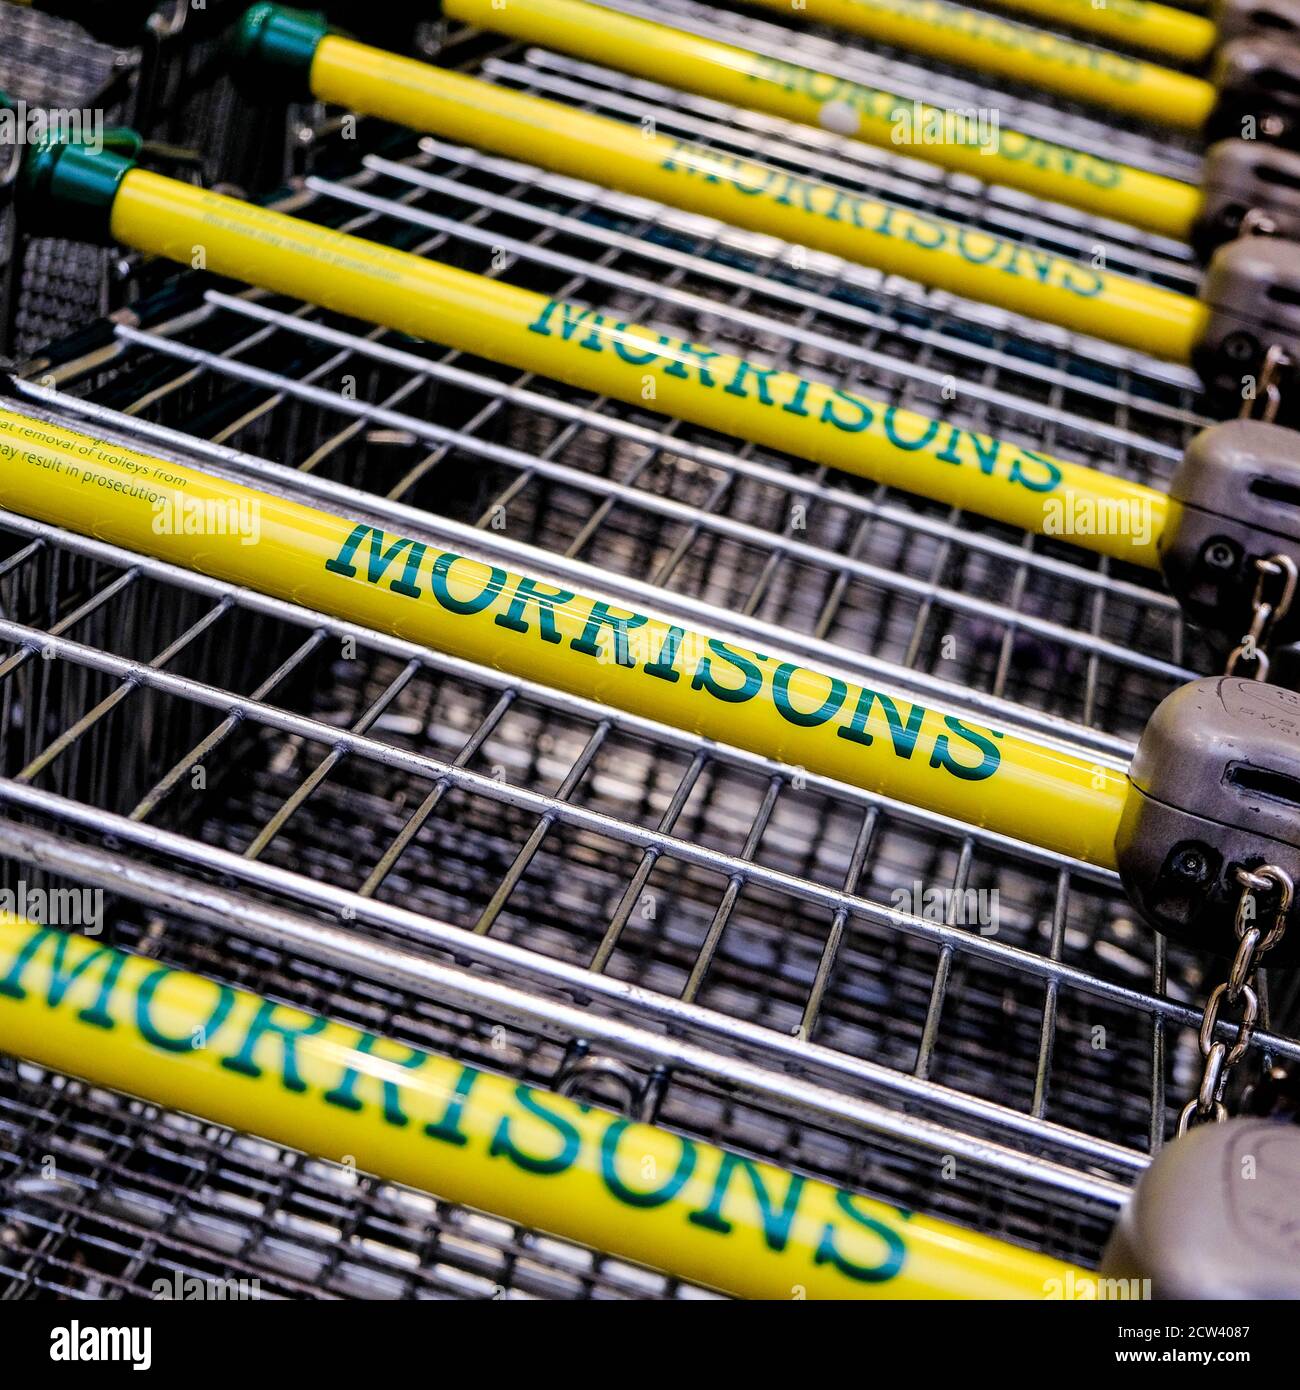 London UK, September 27 2020, Morrisons Supermarket Shopping Trolleys with No People Stock Photo